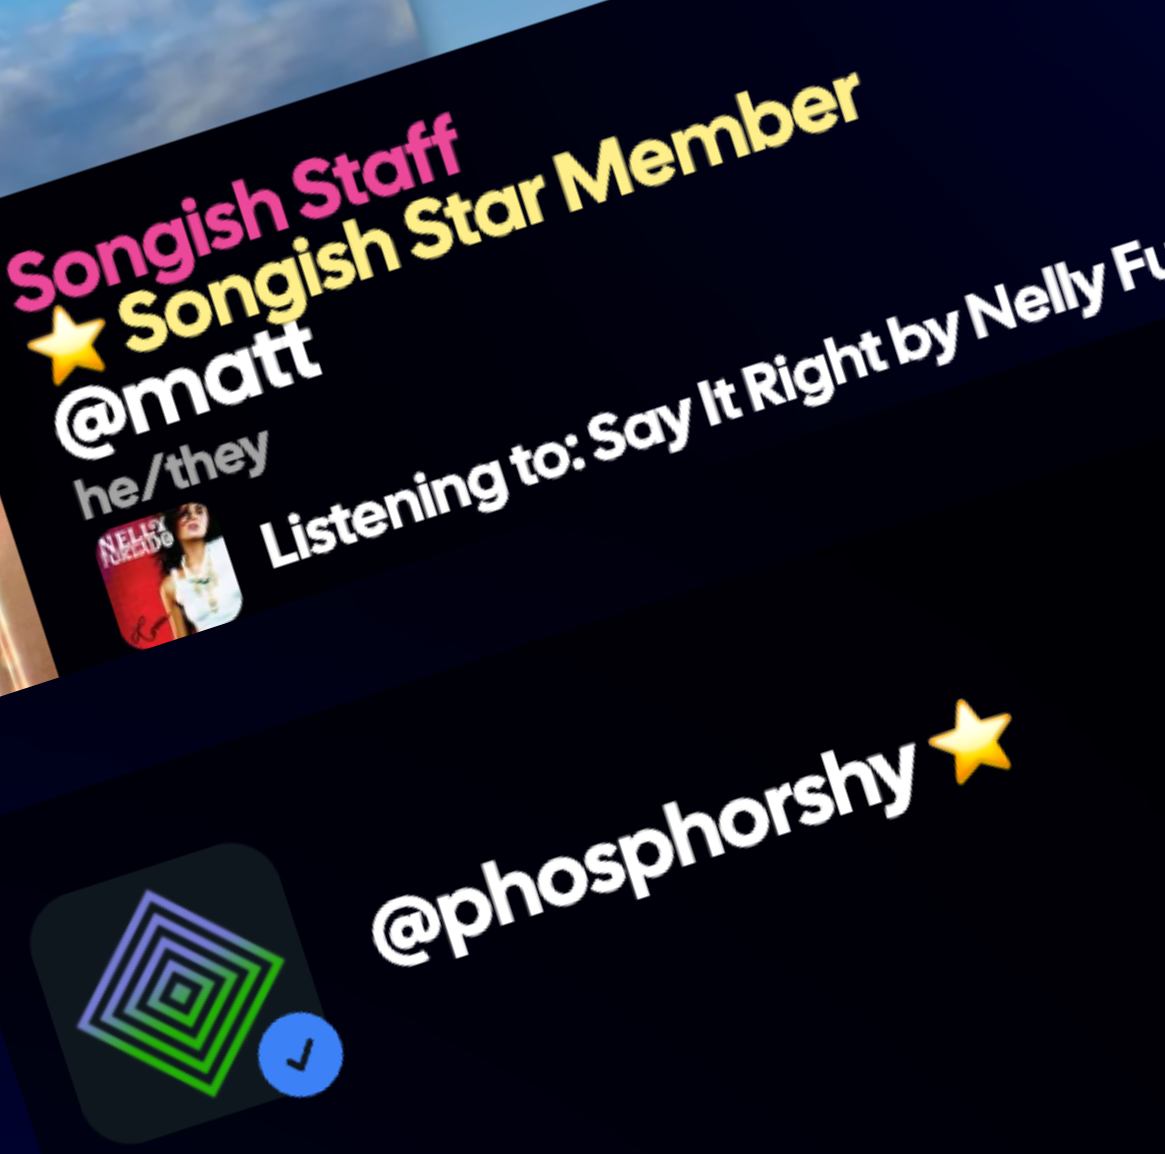 A screenshot showing the 'Songish Star Member' title on a user's profile, and a star next to their name in the feed.